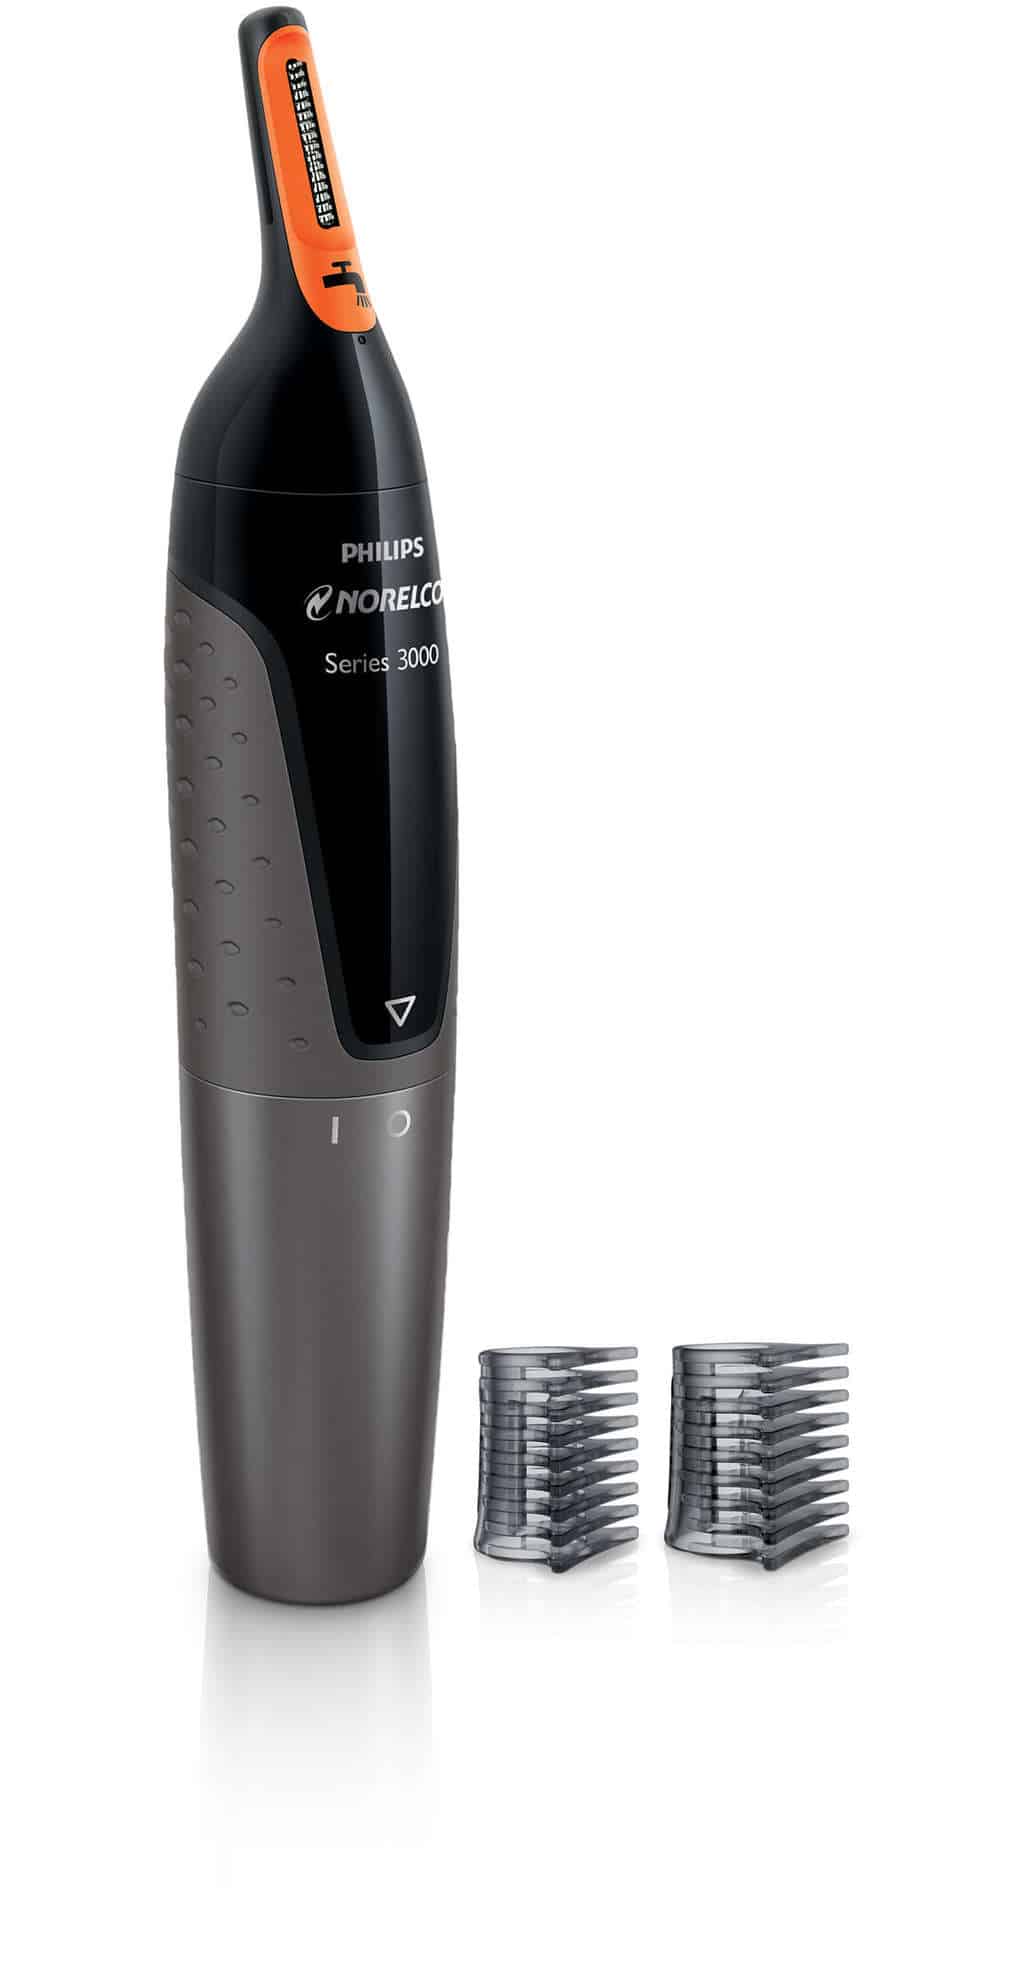 Philips Norelco Nose trimmer 3000, NT3000/49